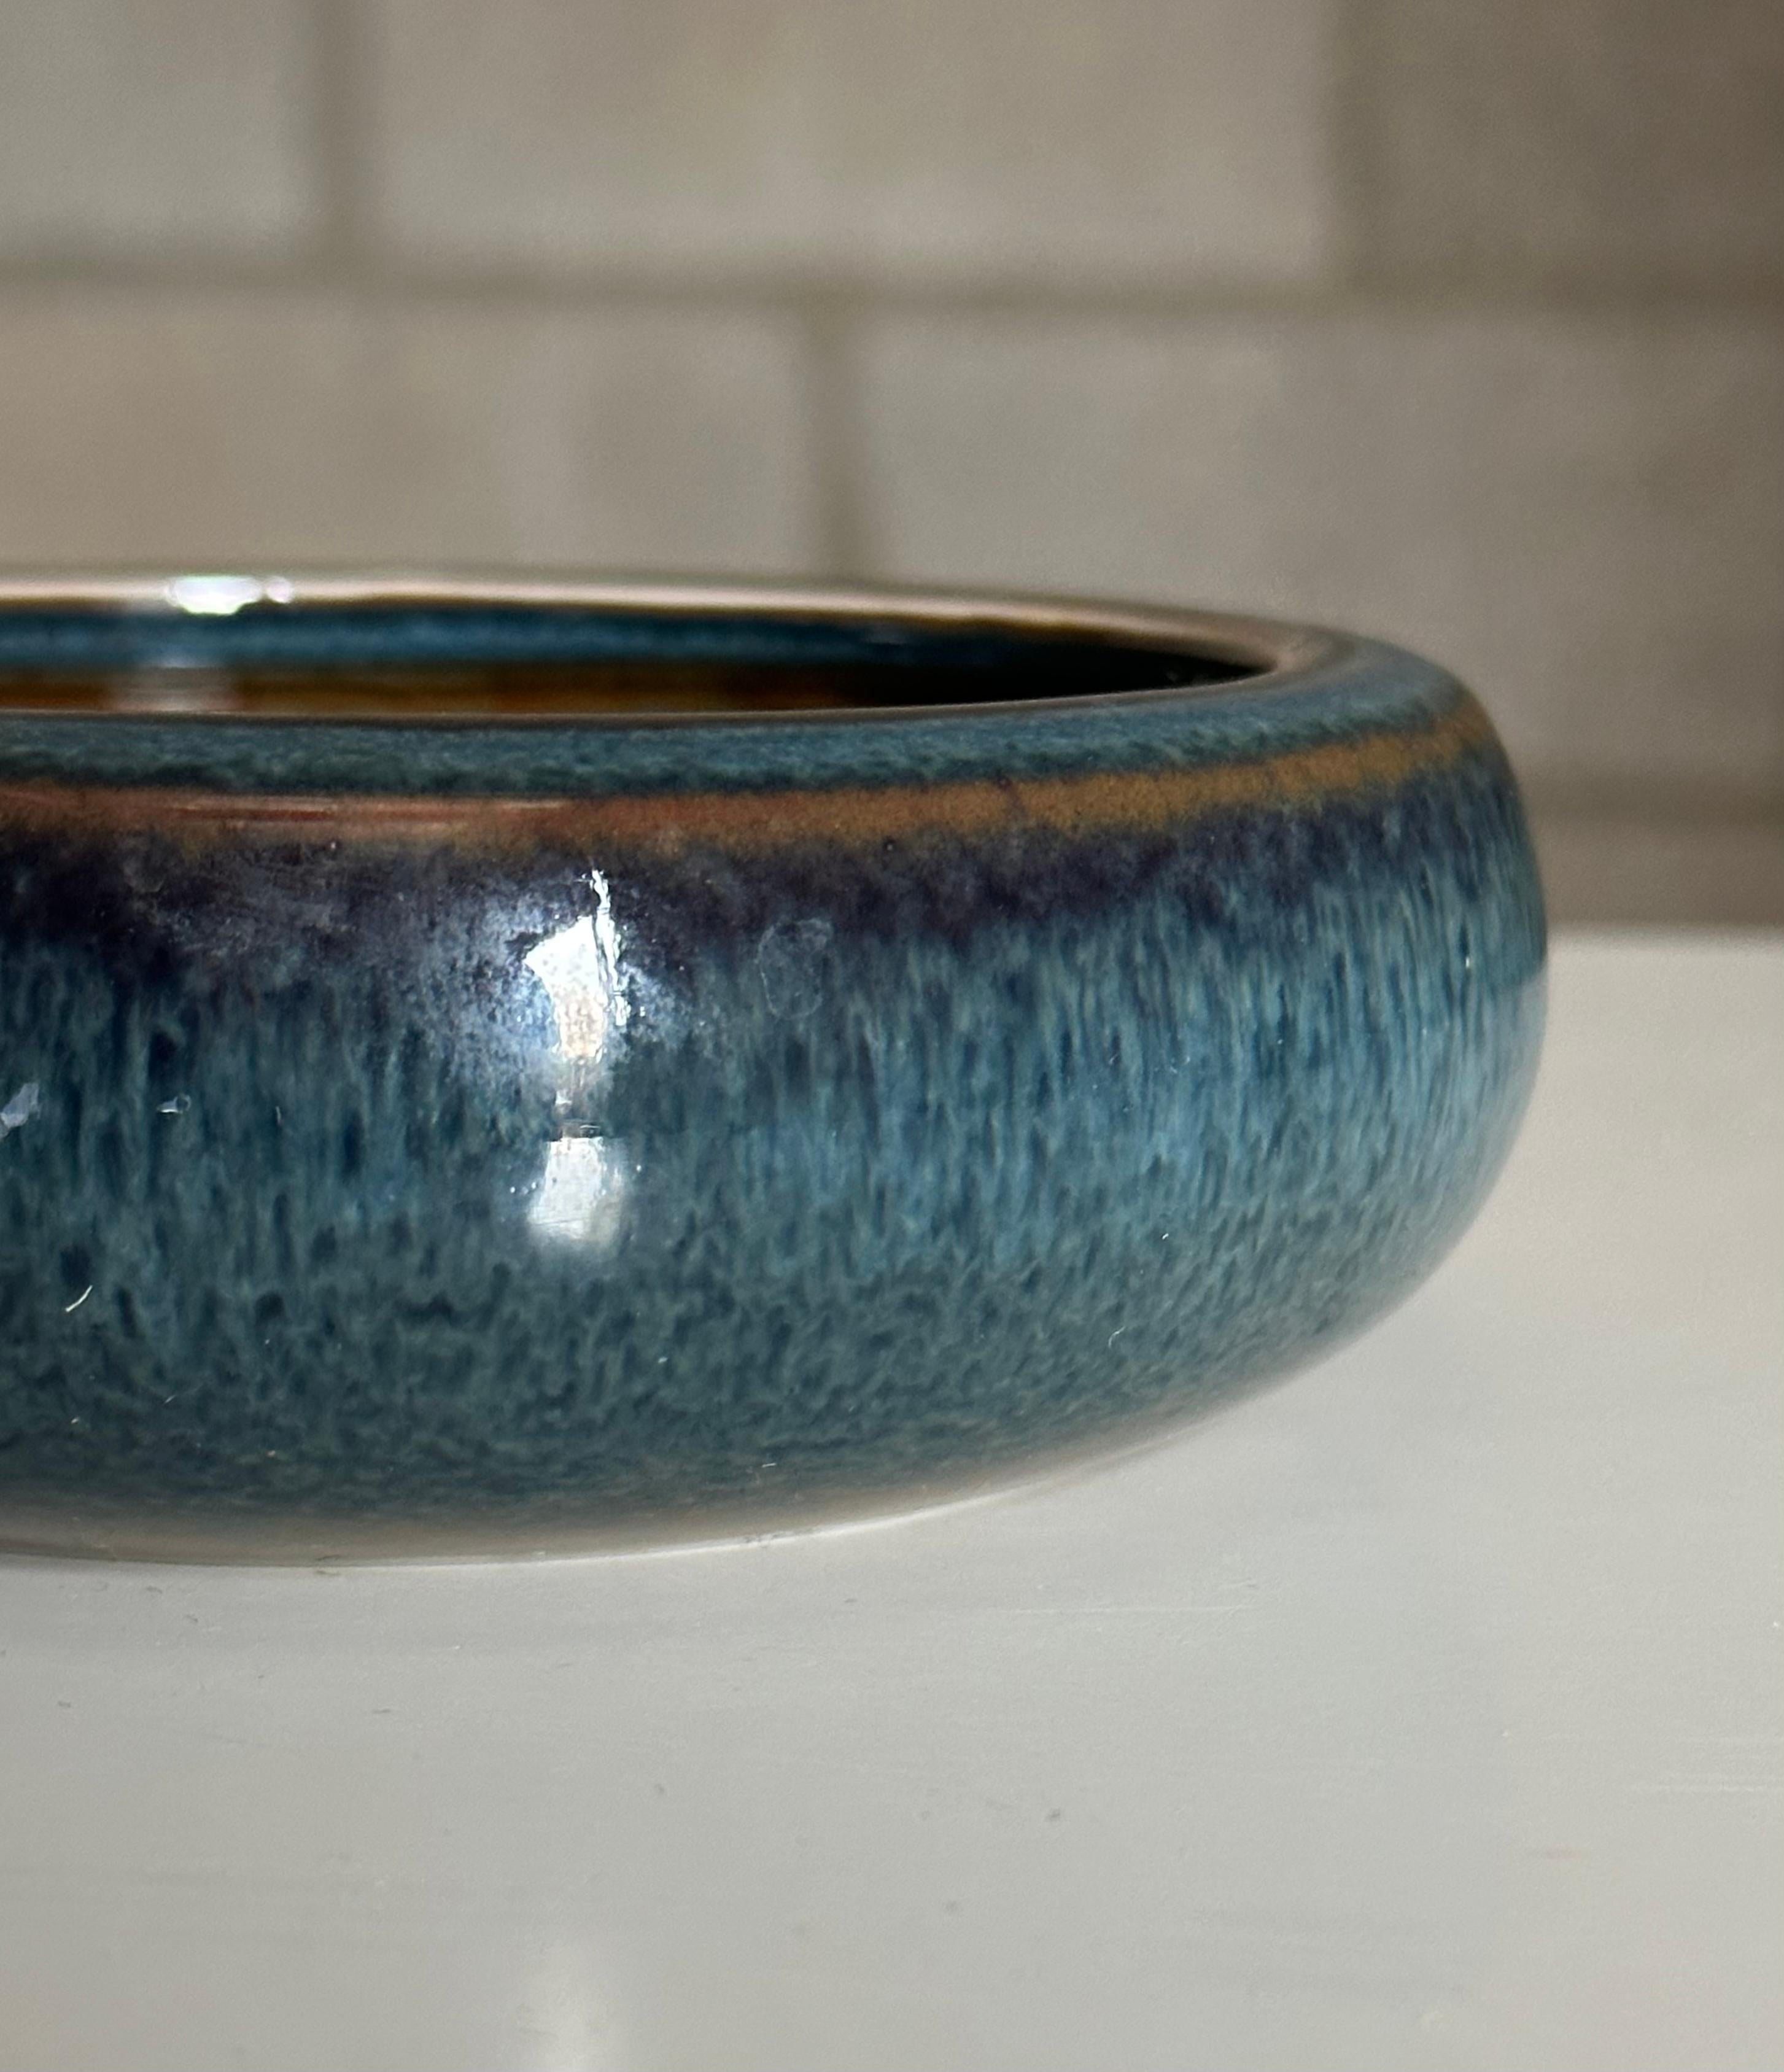 A gorgeous bowl in an unusual glossy blue glaze by Carl Harry Stålhane for Rörstrand. Good size could allow for use as a vide poche. Would work well in a variety of interiors from modern, mid century modern contemporary, minimalist, Swedish modern,